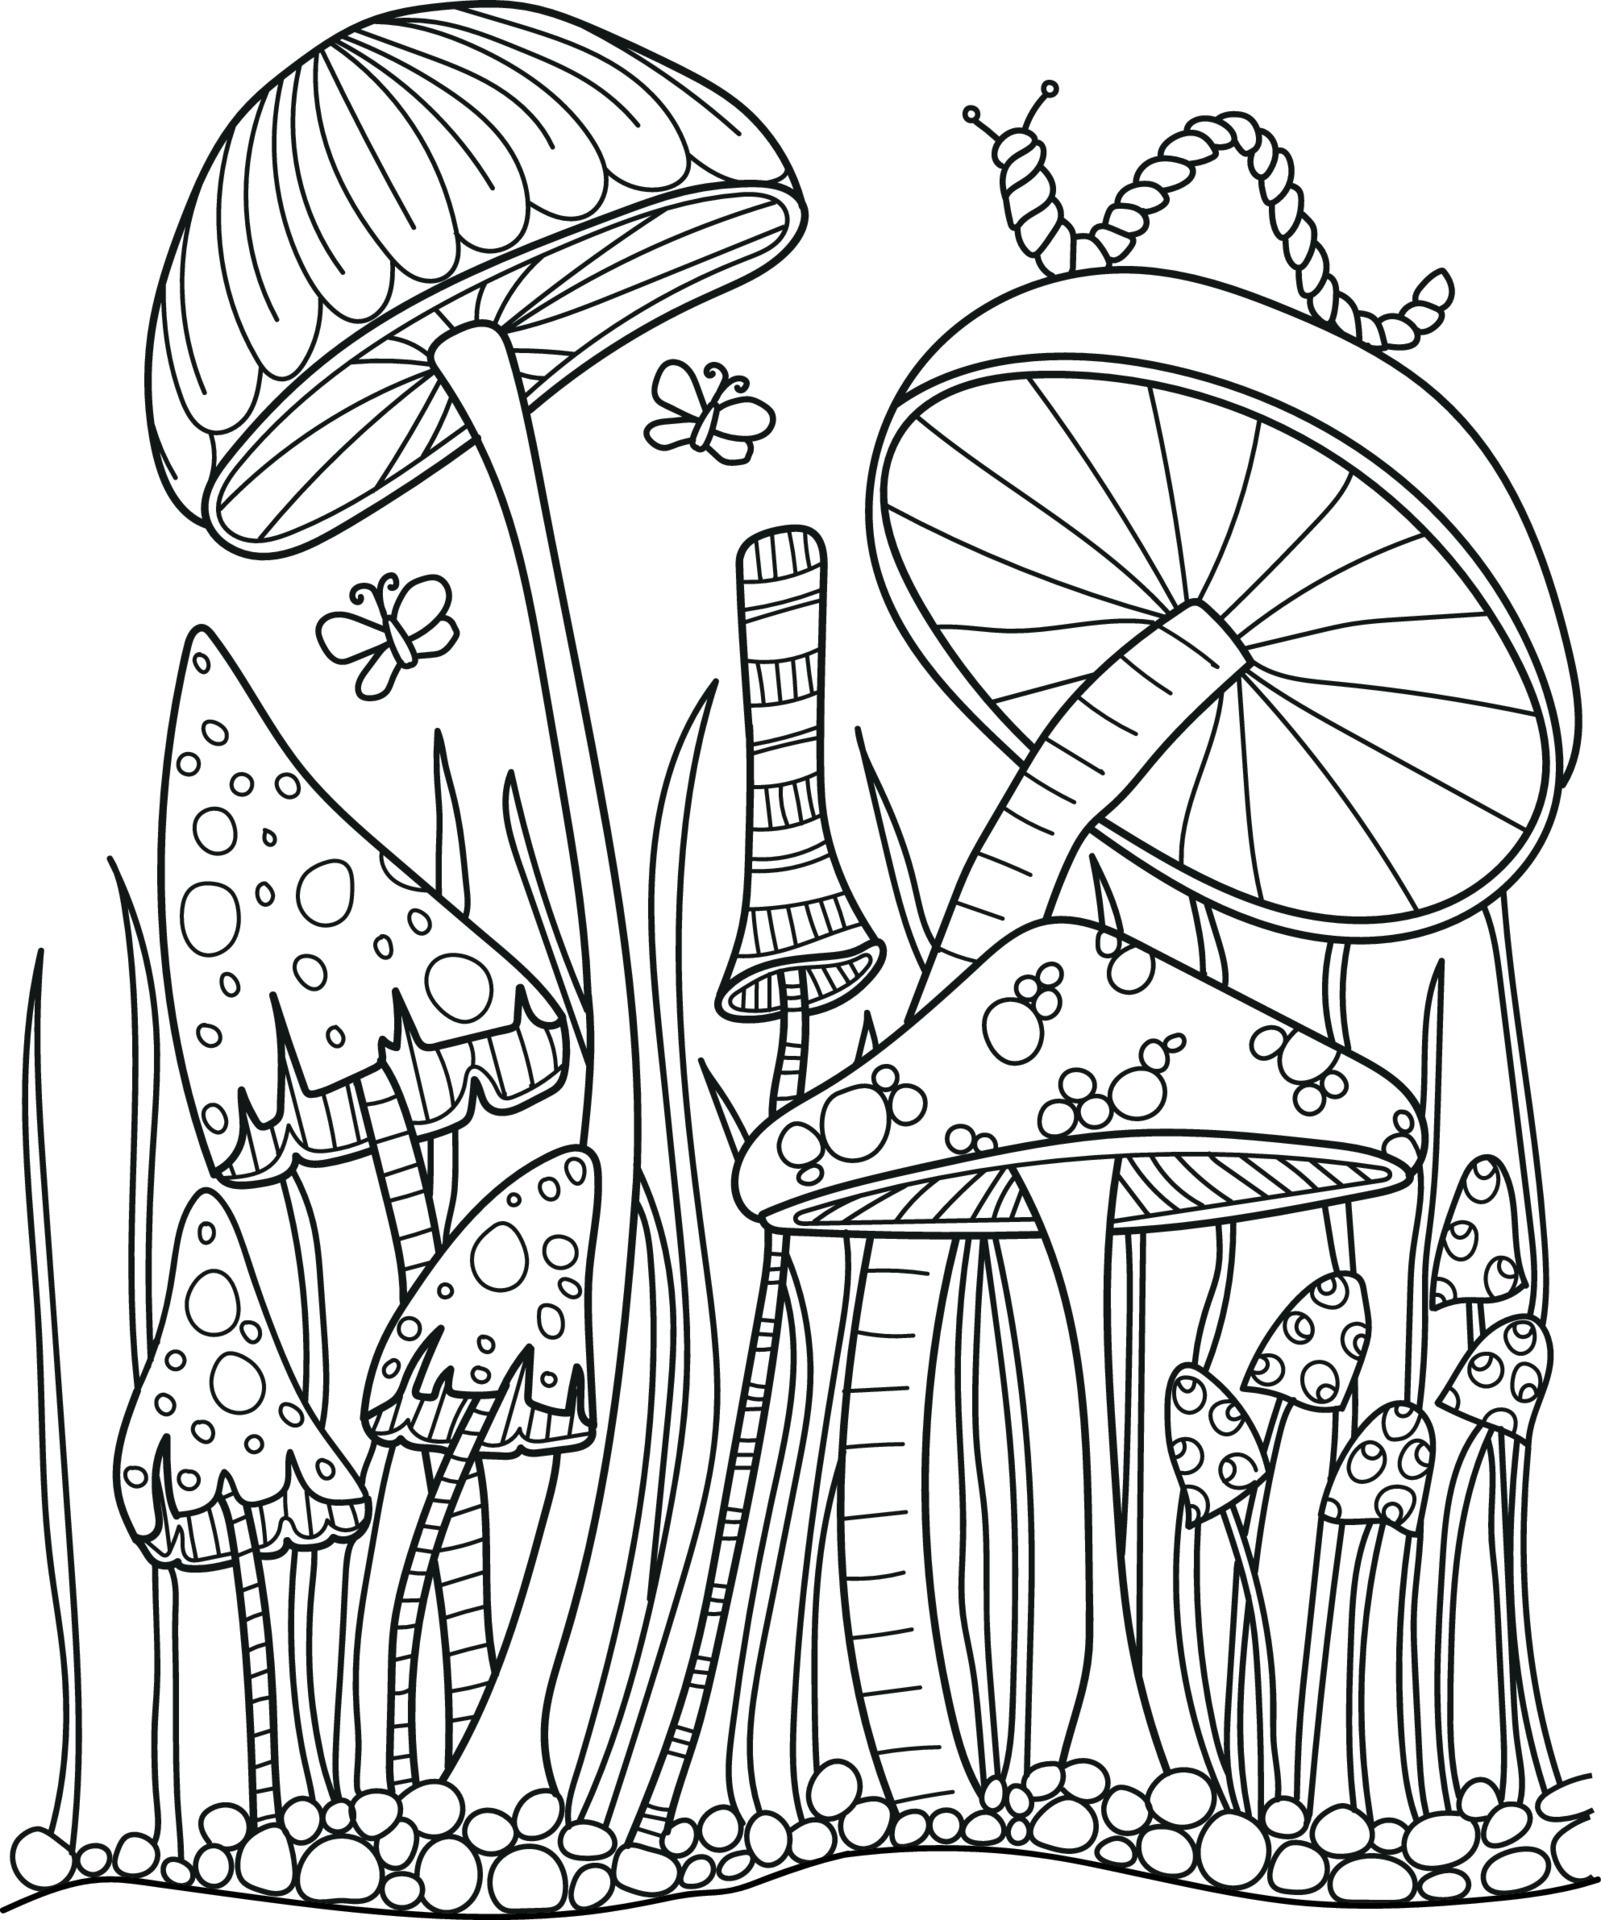 Mushroom Coloring Page For Adults 8998221 Vector Art at Vecteezy